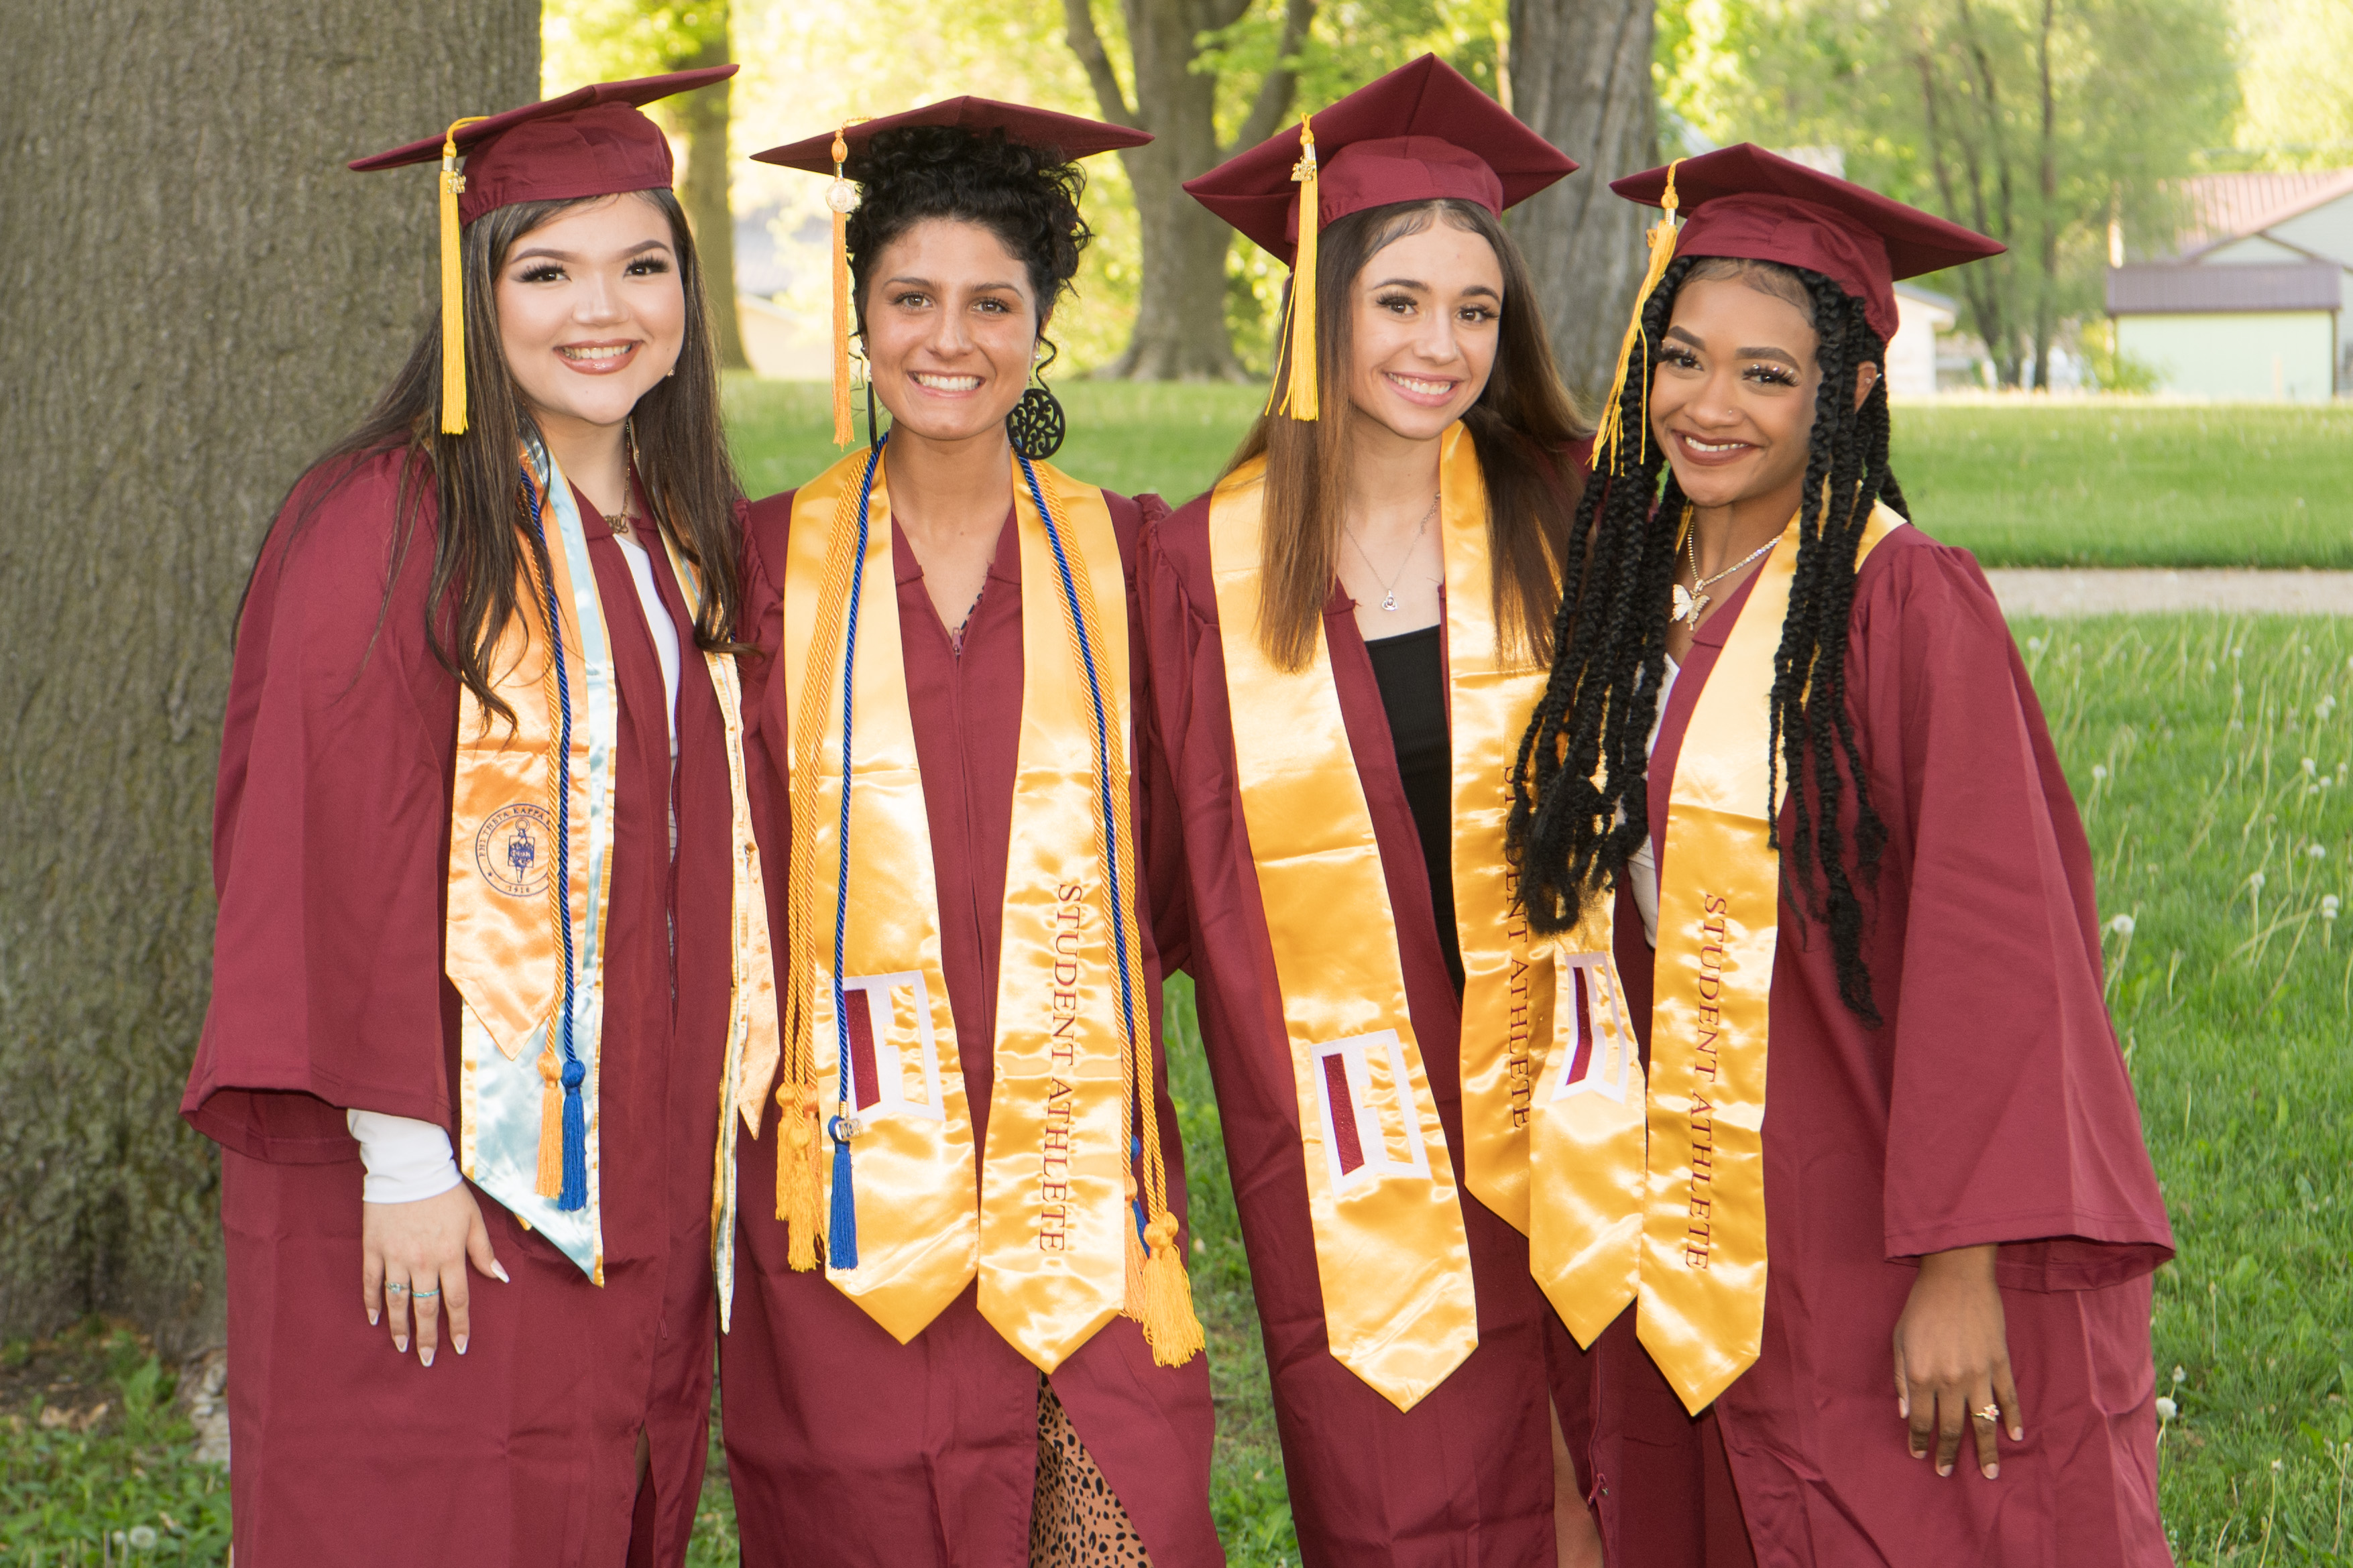 Indian Hills College on Twitter "CENTERVILLE GRADUATION 2022... There